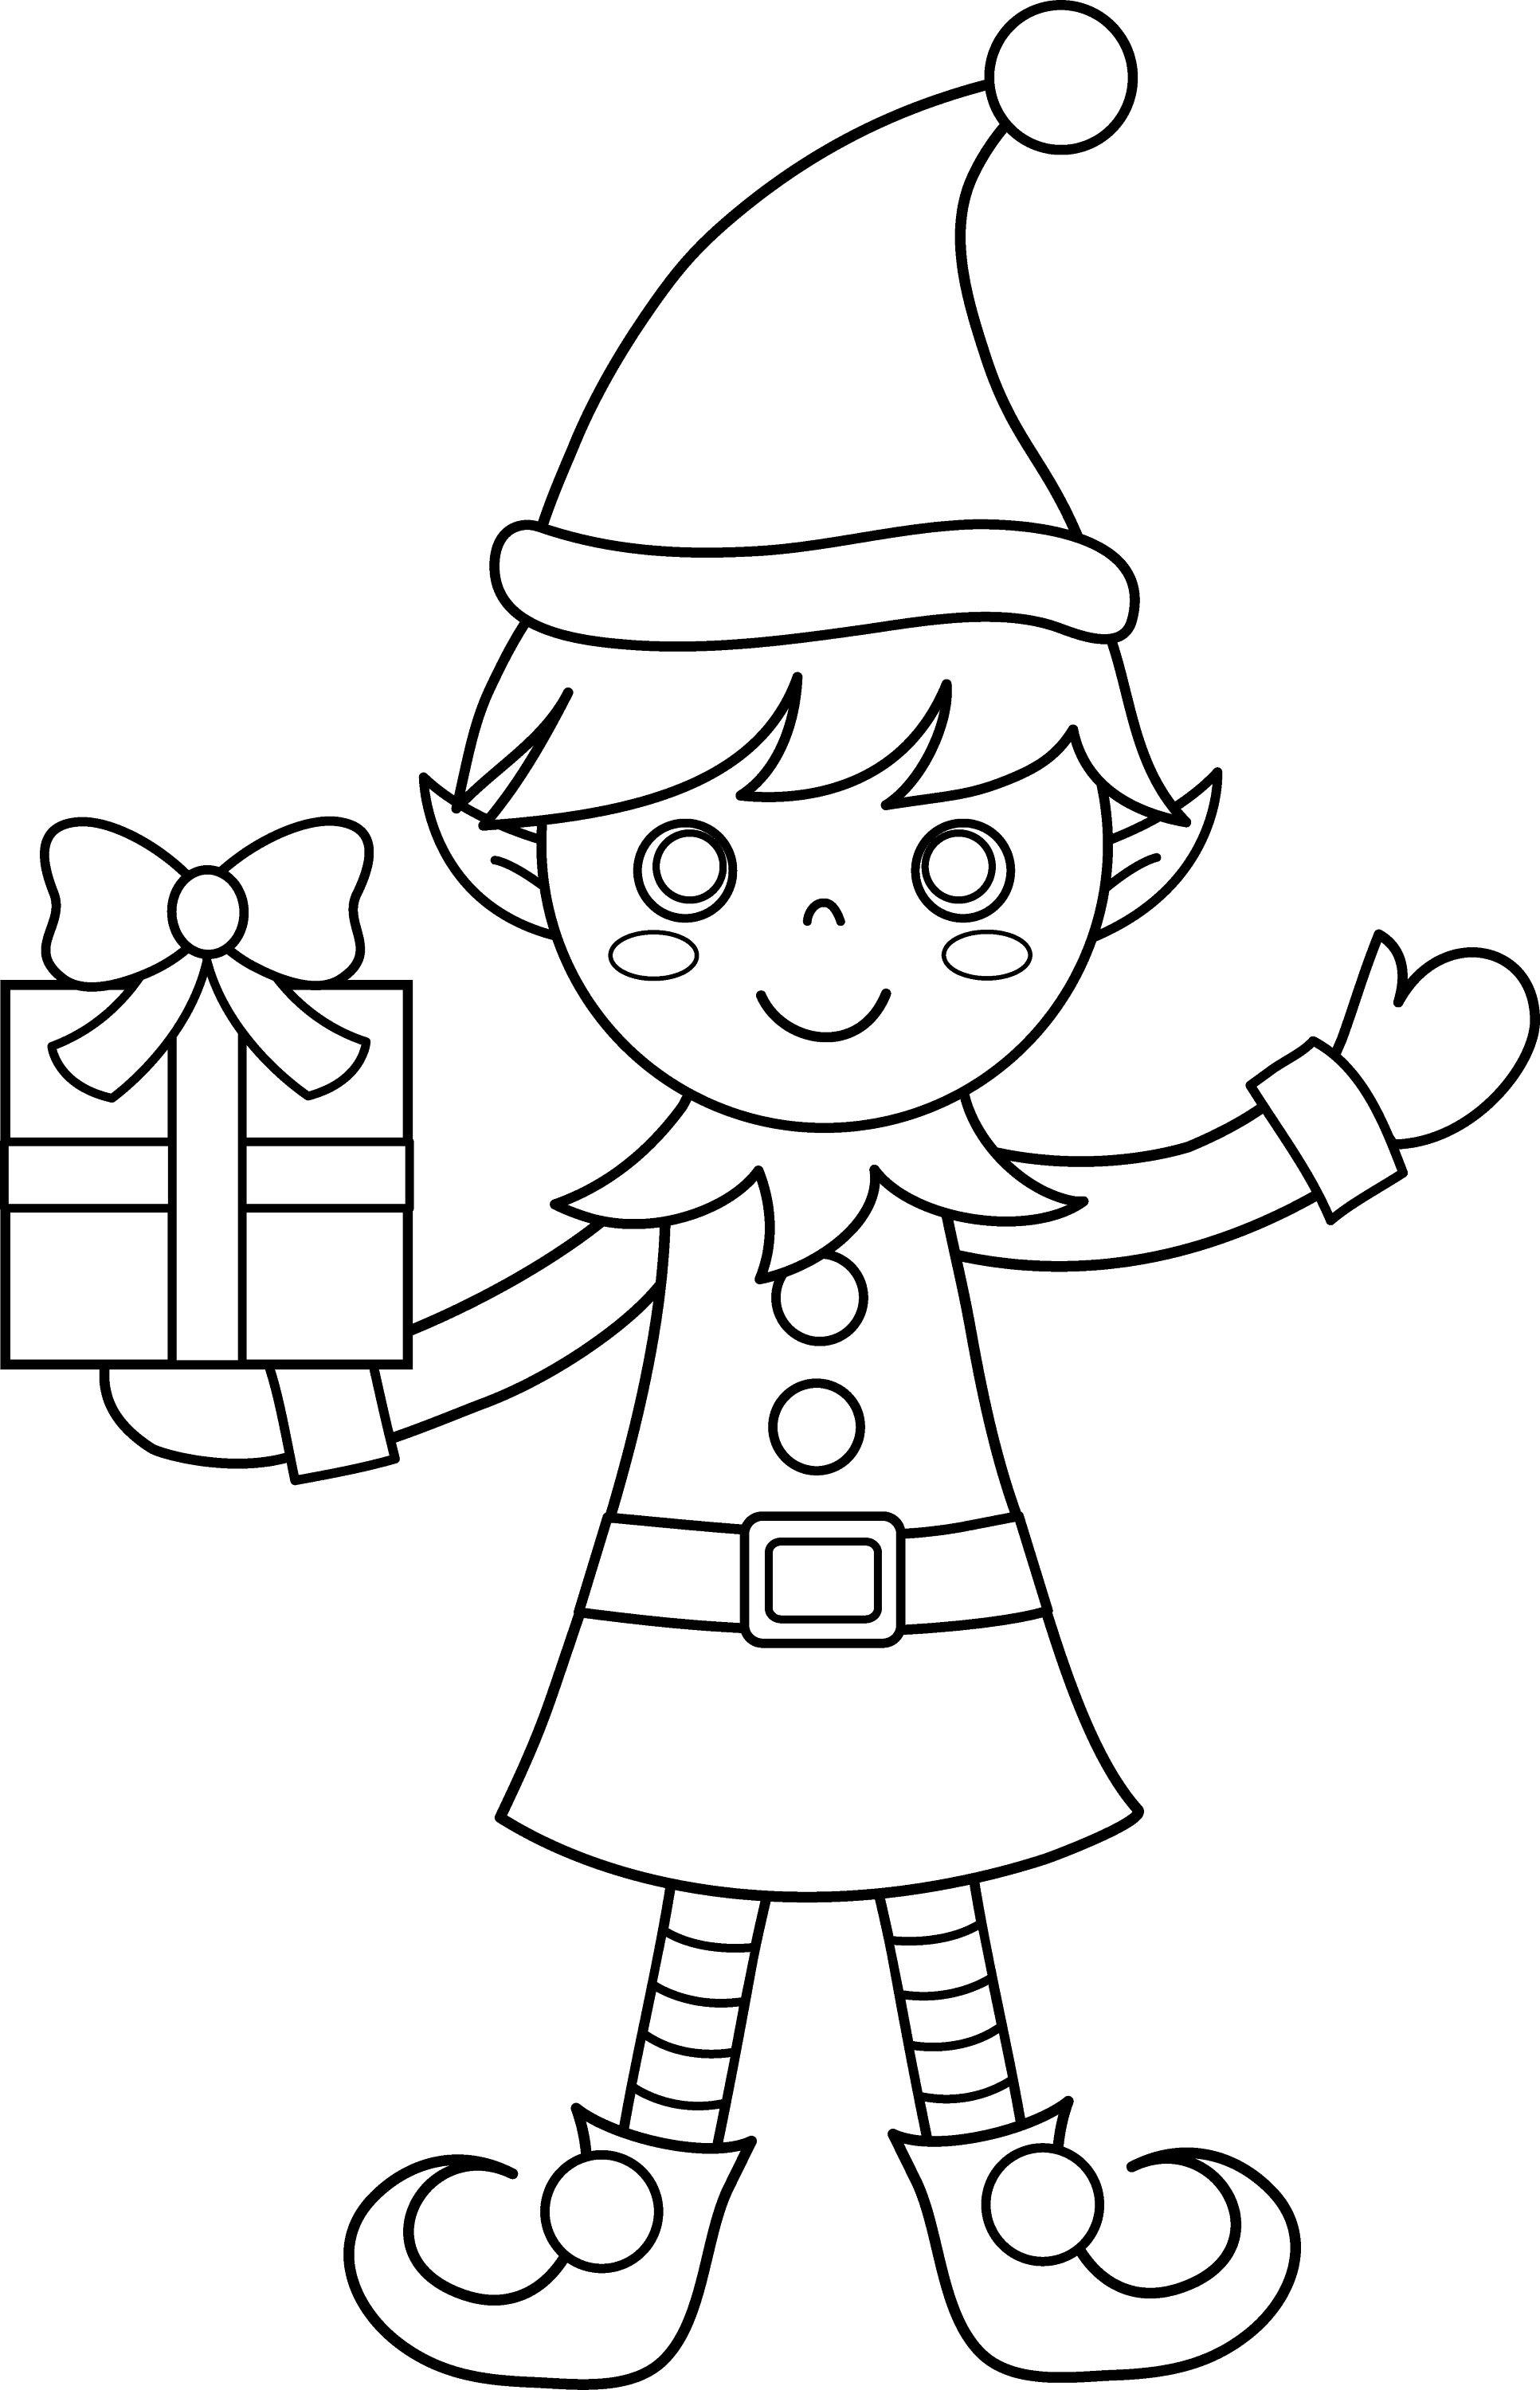  Free Printable Elf Coloring Pages Free Download Goodimg co